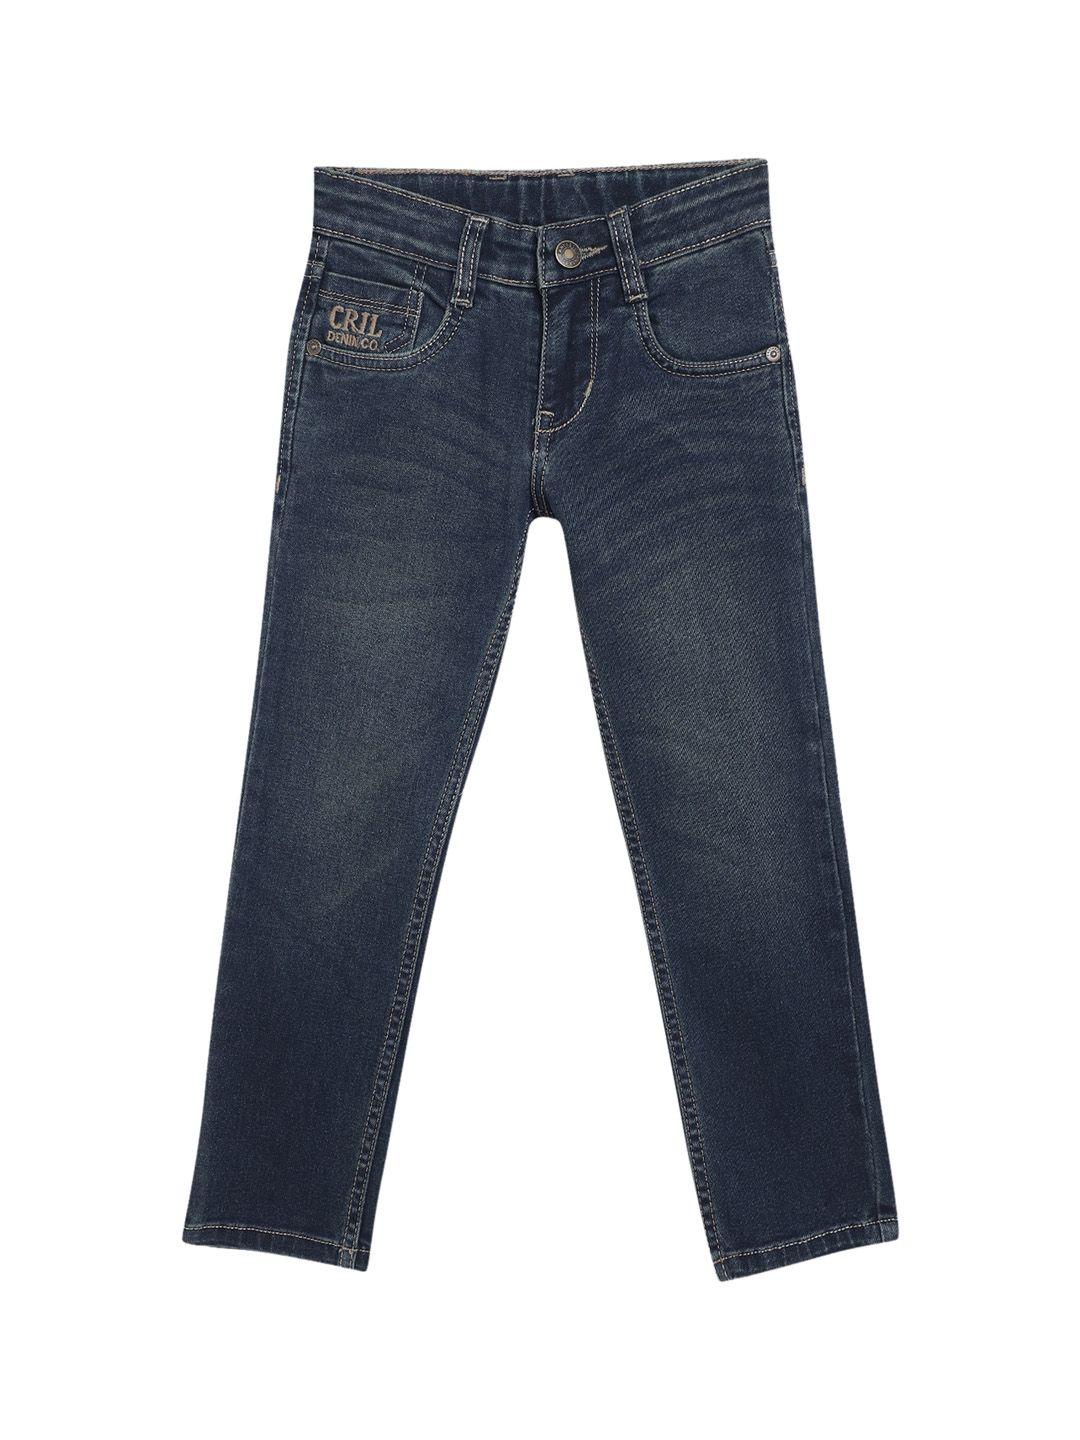 cantabil-boys-light-fade-stretchable-cotton-jeans